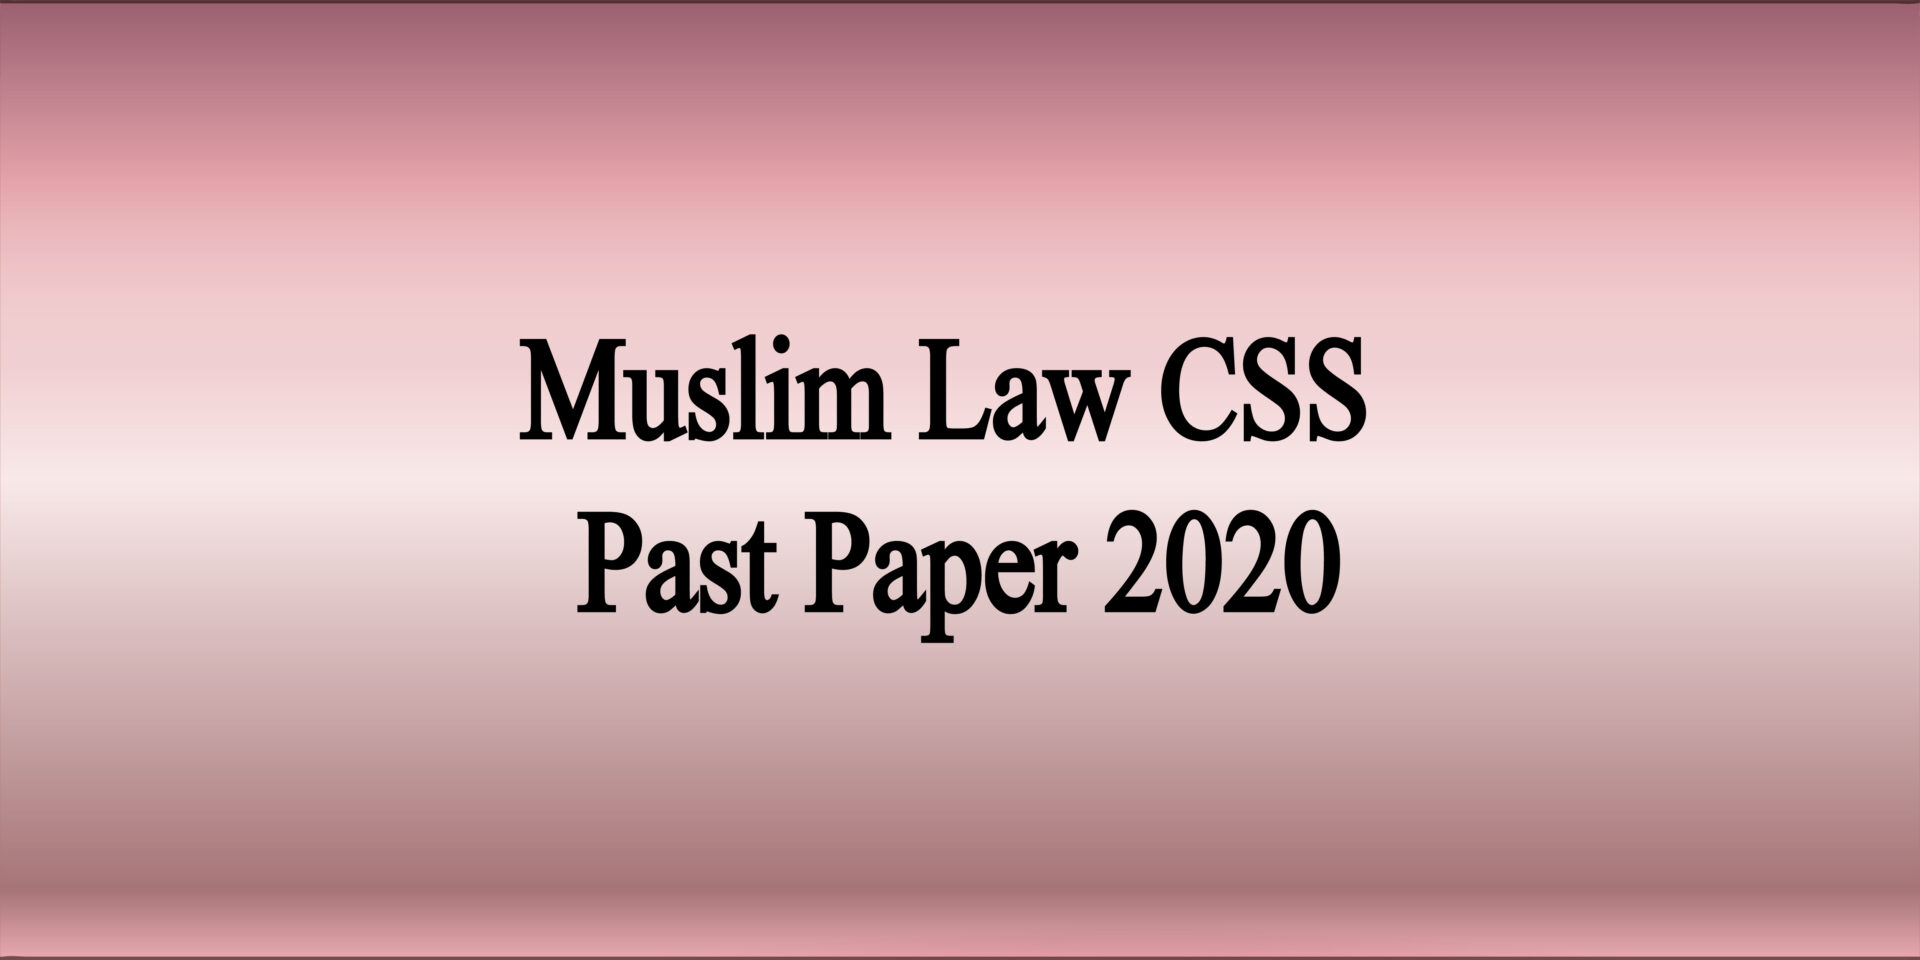 Muslim Law CSS Past Paper 2020